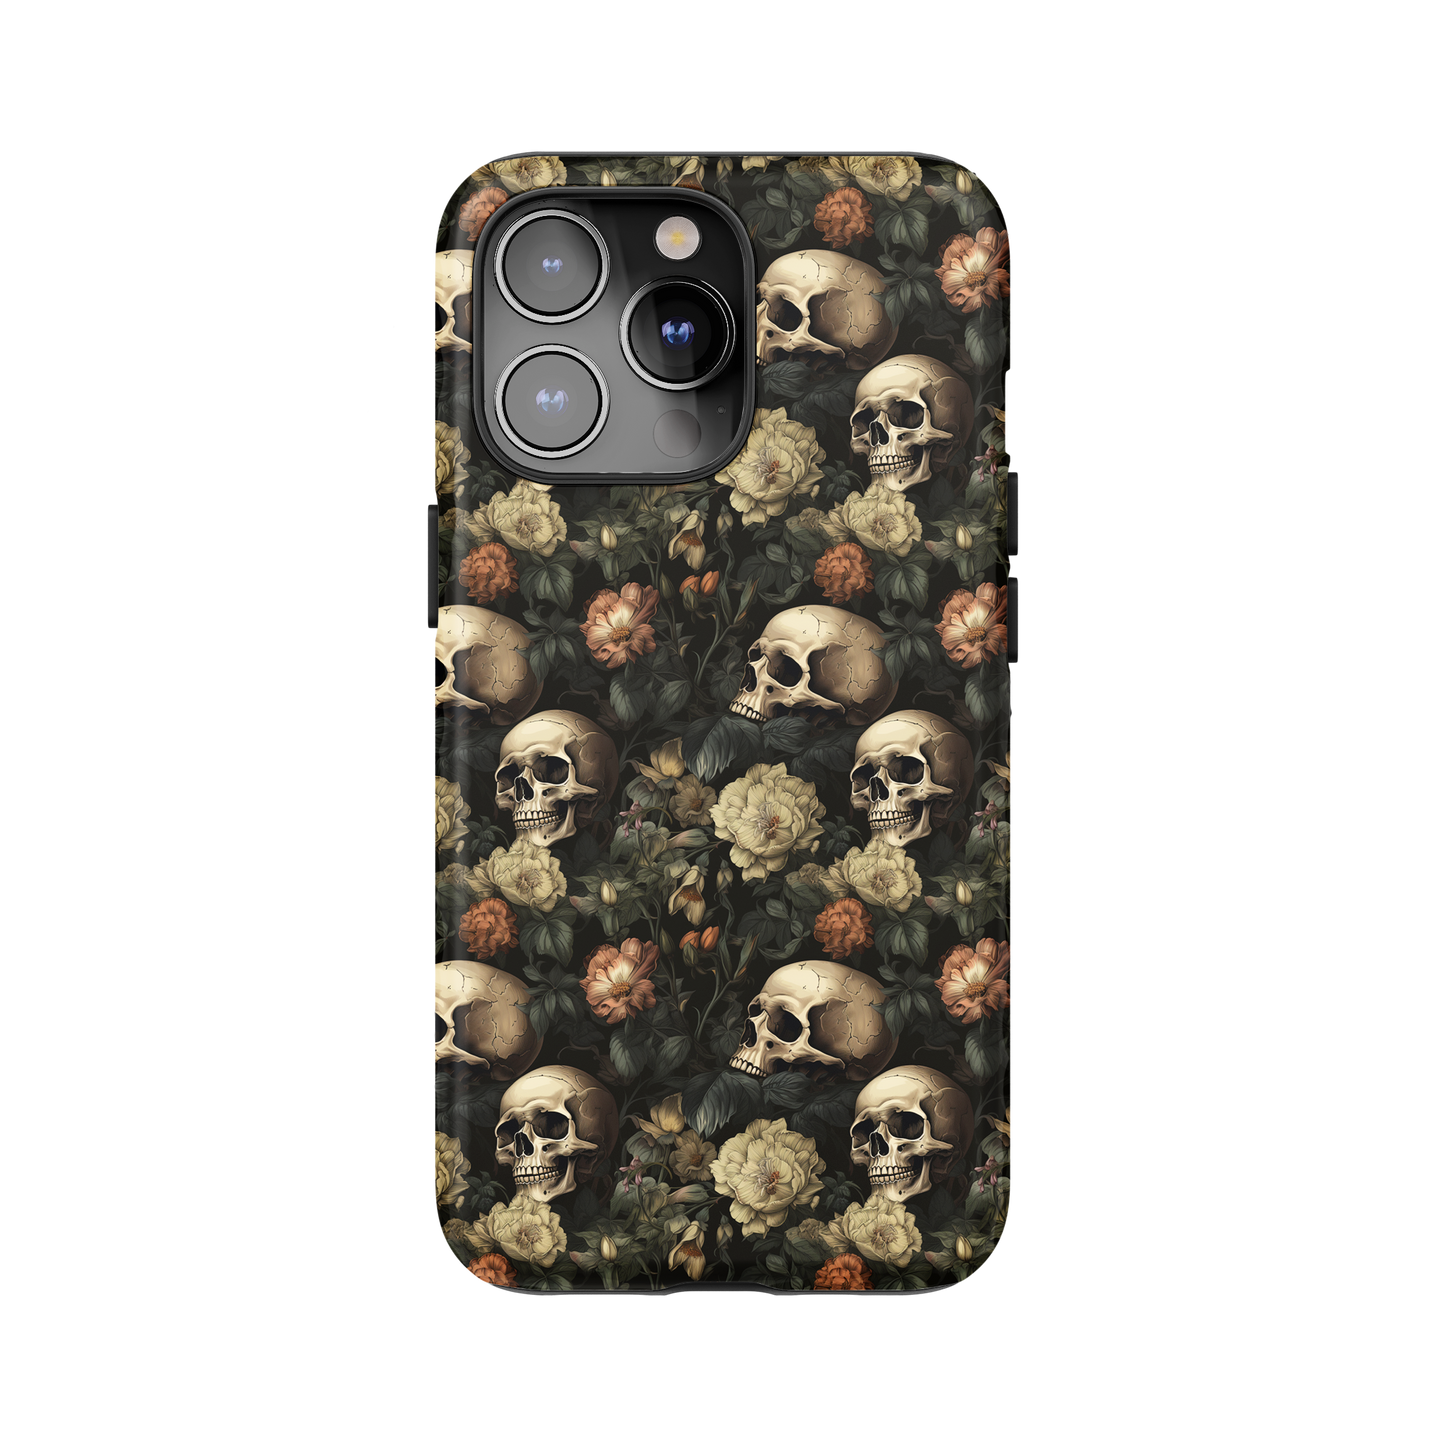 Skull Floral Phone Case for iPhone and Samsung